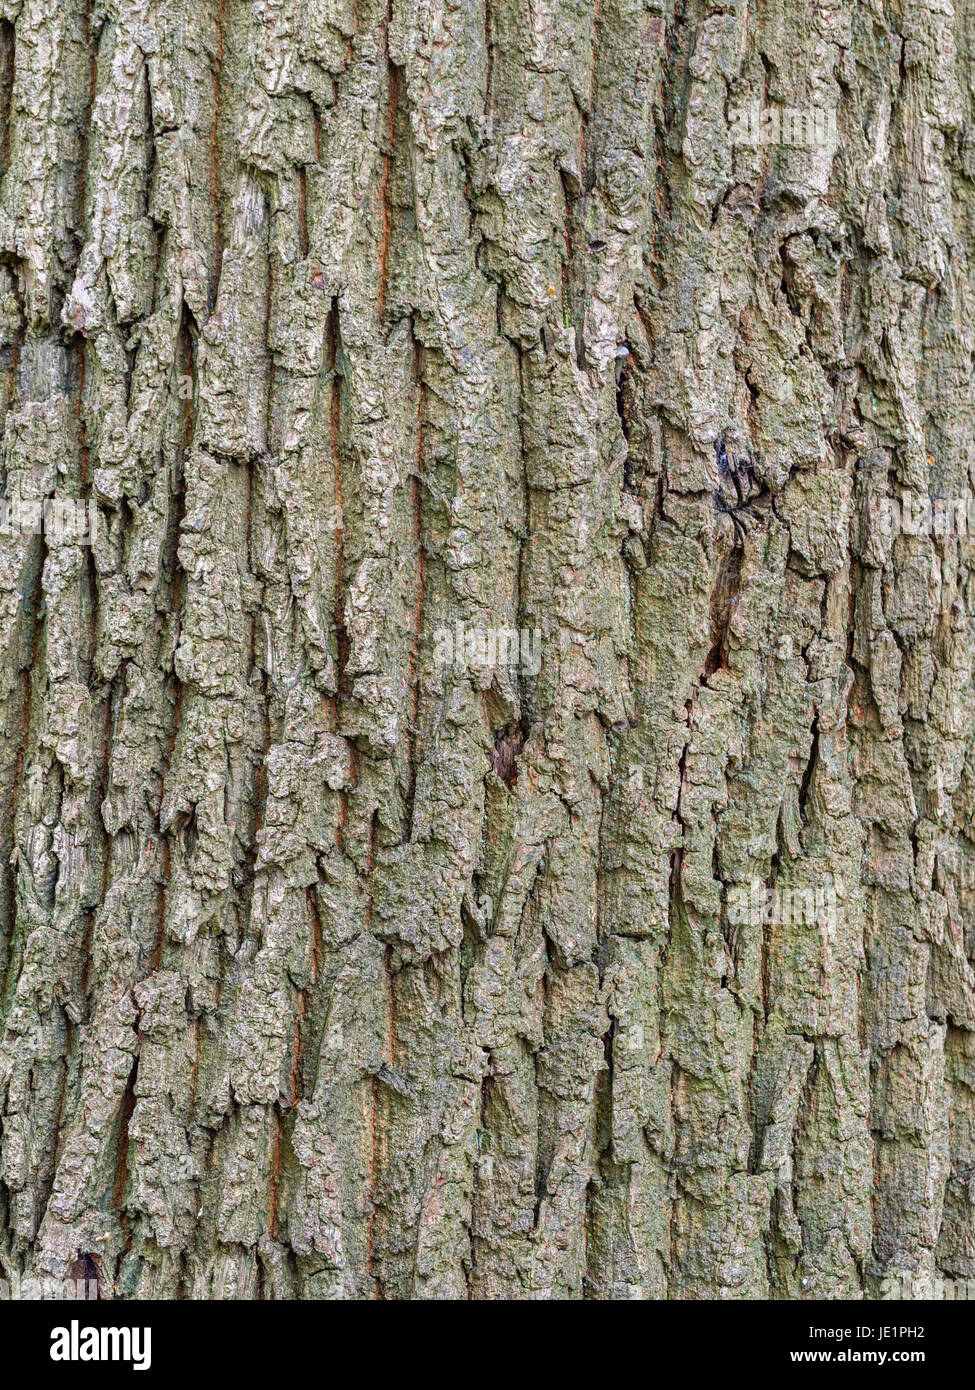 Texture of tree bark, background pattern in portrait format. Stock Photo